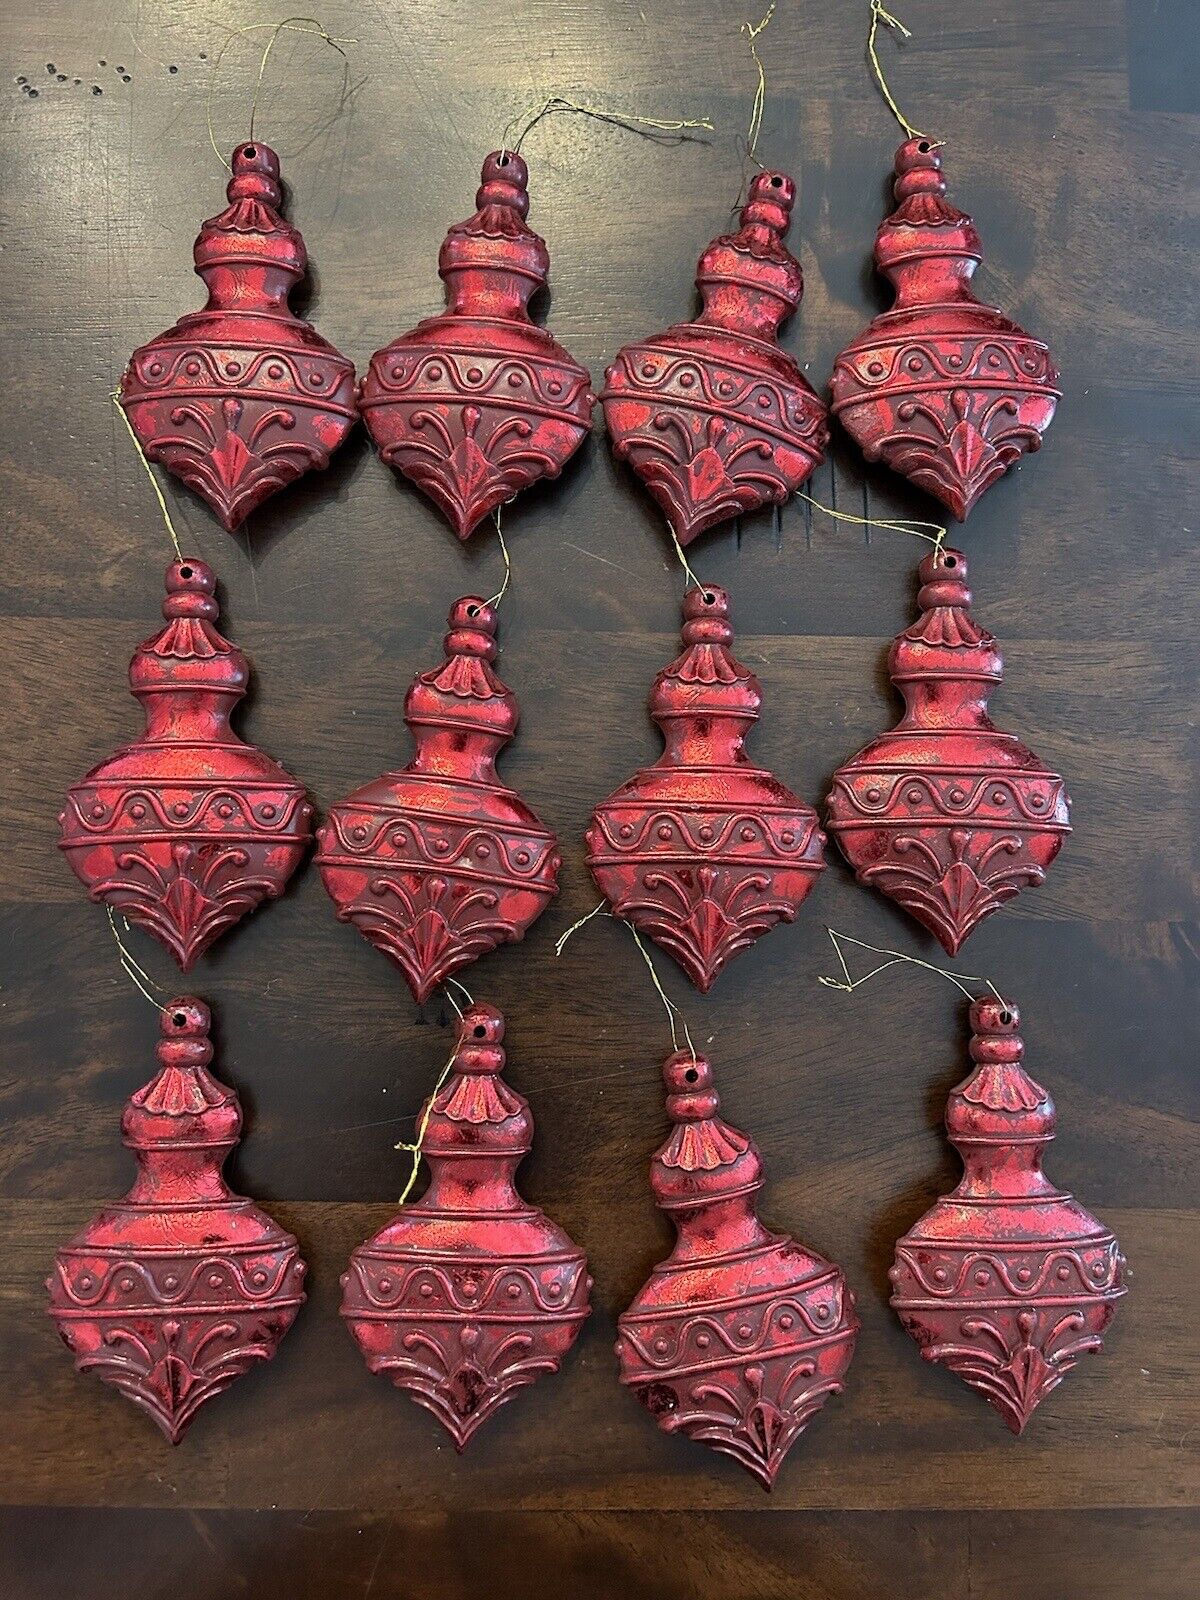 Vintage Red Finial Ornament Set of twleve 12 Christmas Ornaments approx 3.5 inch